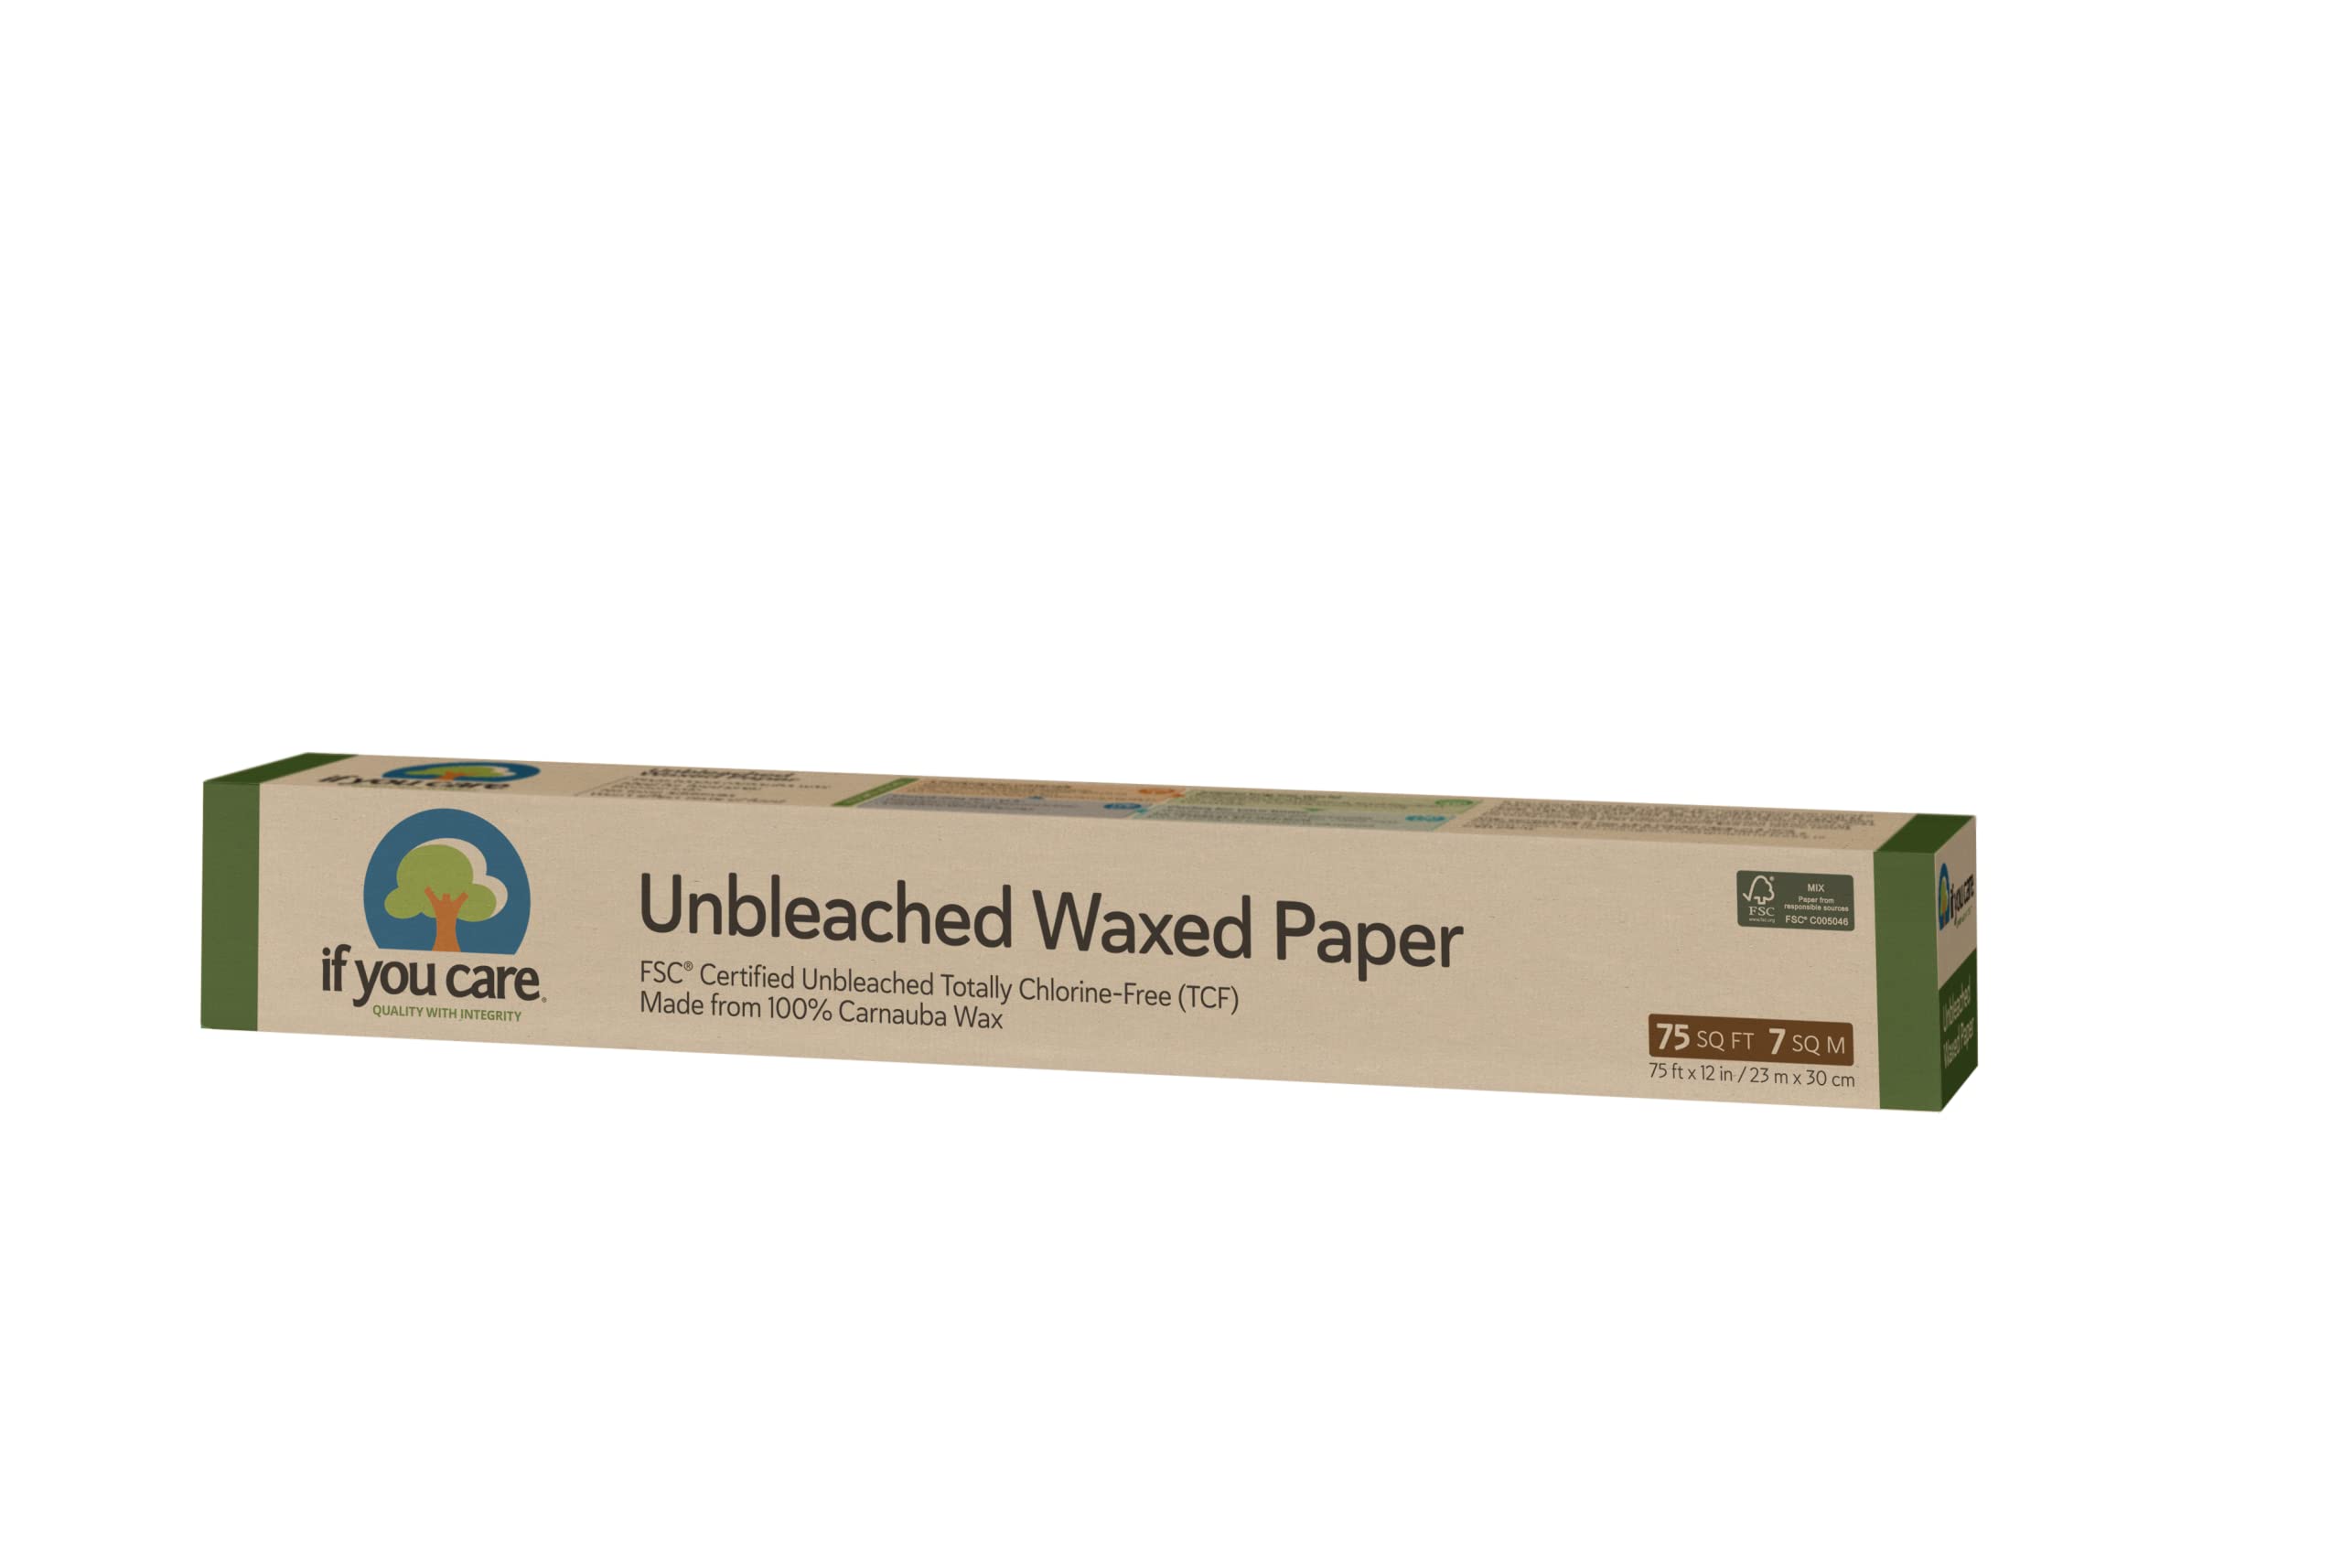 If You Care Wax Paper Rolls – 12 Pack of 75 Sq Ft Rolls - Unbleached,  Chlorine Free, 100% Natural Soybean Coated Waxed Sheets, Liner for Baking,  Cooking, Food Wrapping 75 Sq Ft (Pack of 12)